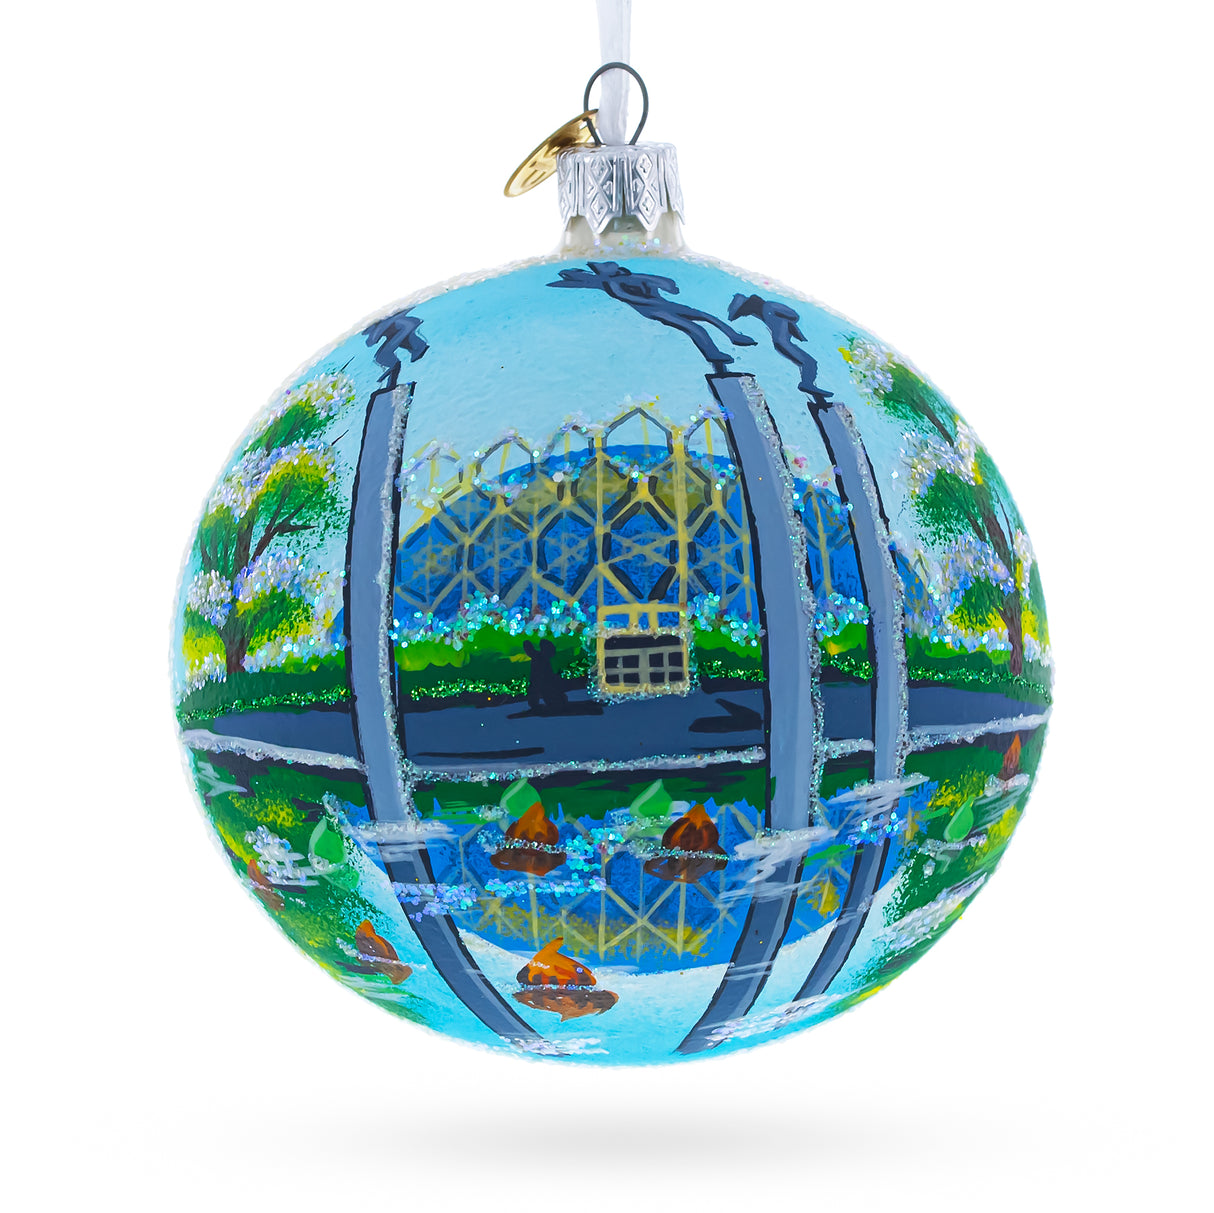 Botanical Garden in St. Louis, Missouri Glass Ball Christmas Ornament 4 Inches in Multi color, Round shape